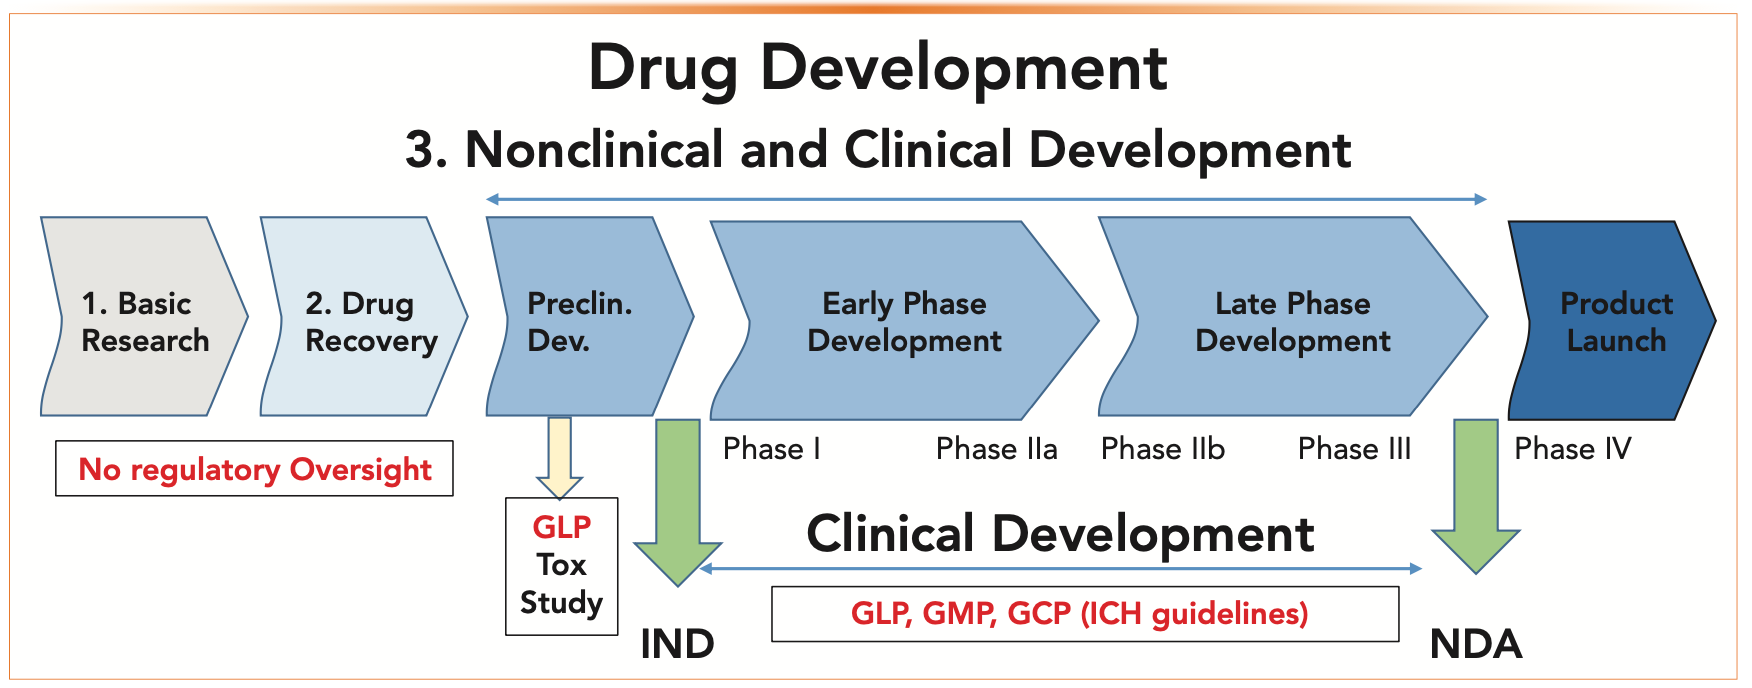 FIGURE 1: The primary stages of the drug development process and relevant regulations that are associated with each stage.